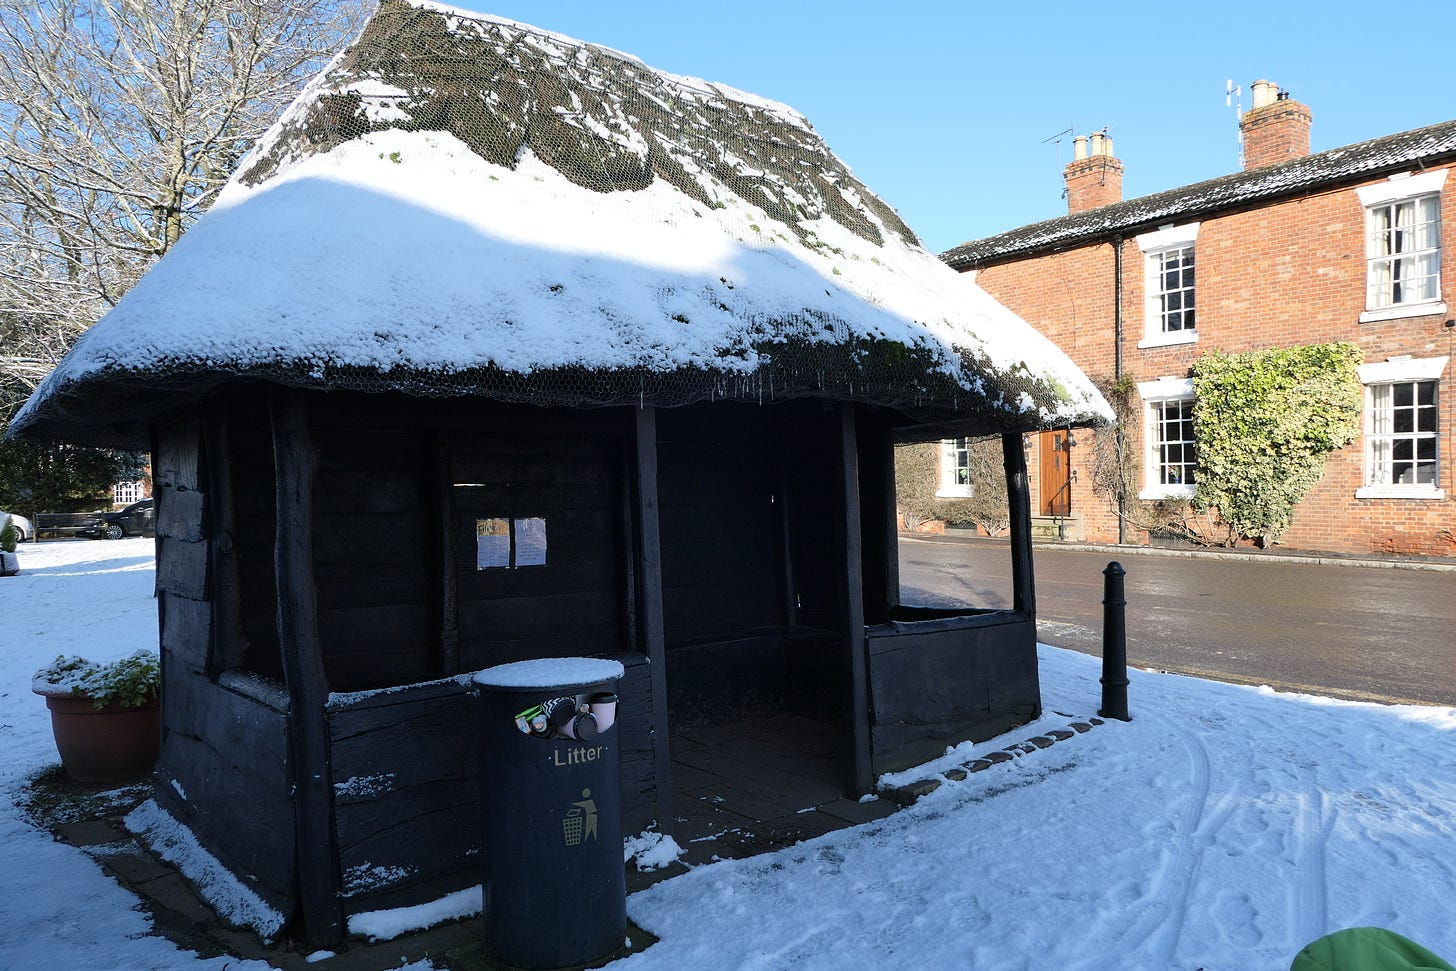 Dunchurch bus shelter in the snow